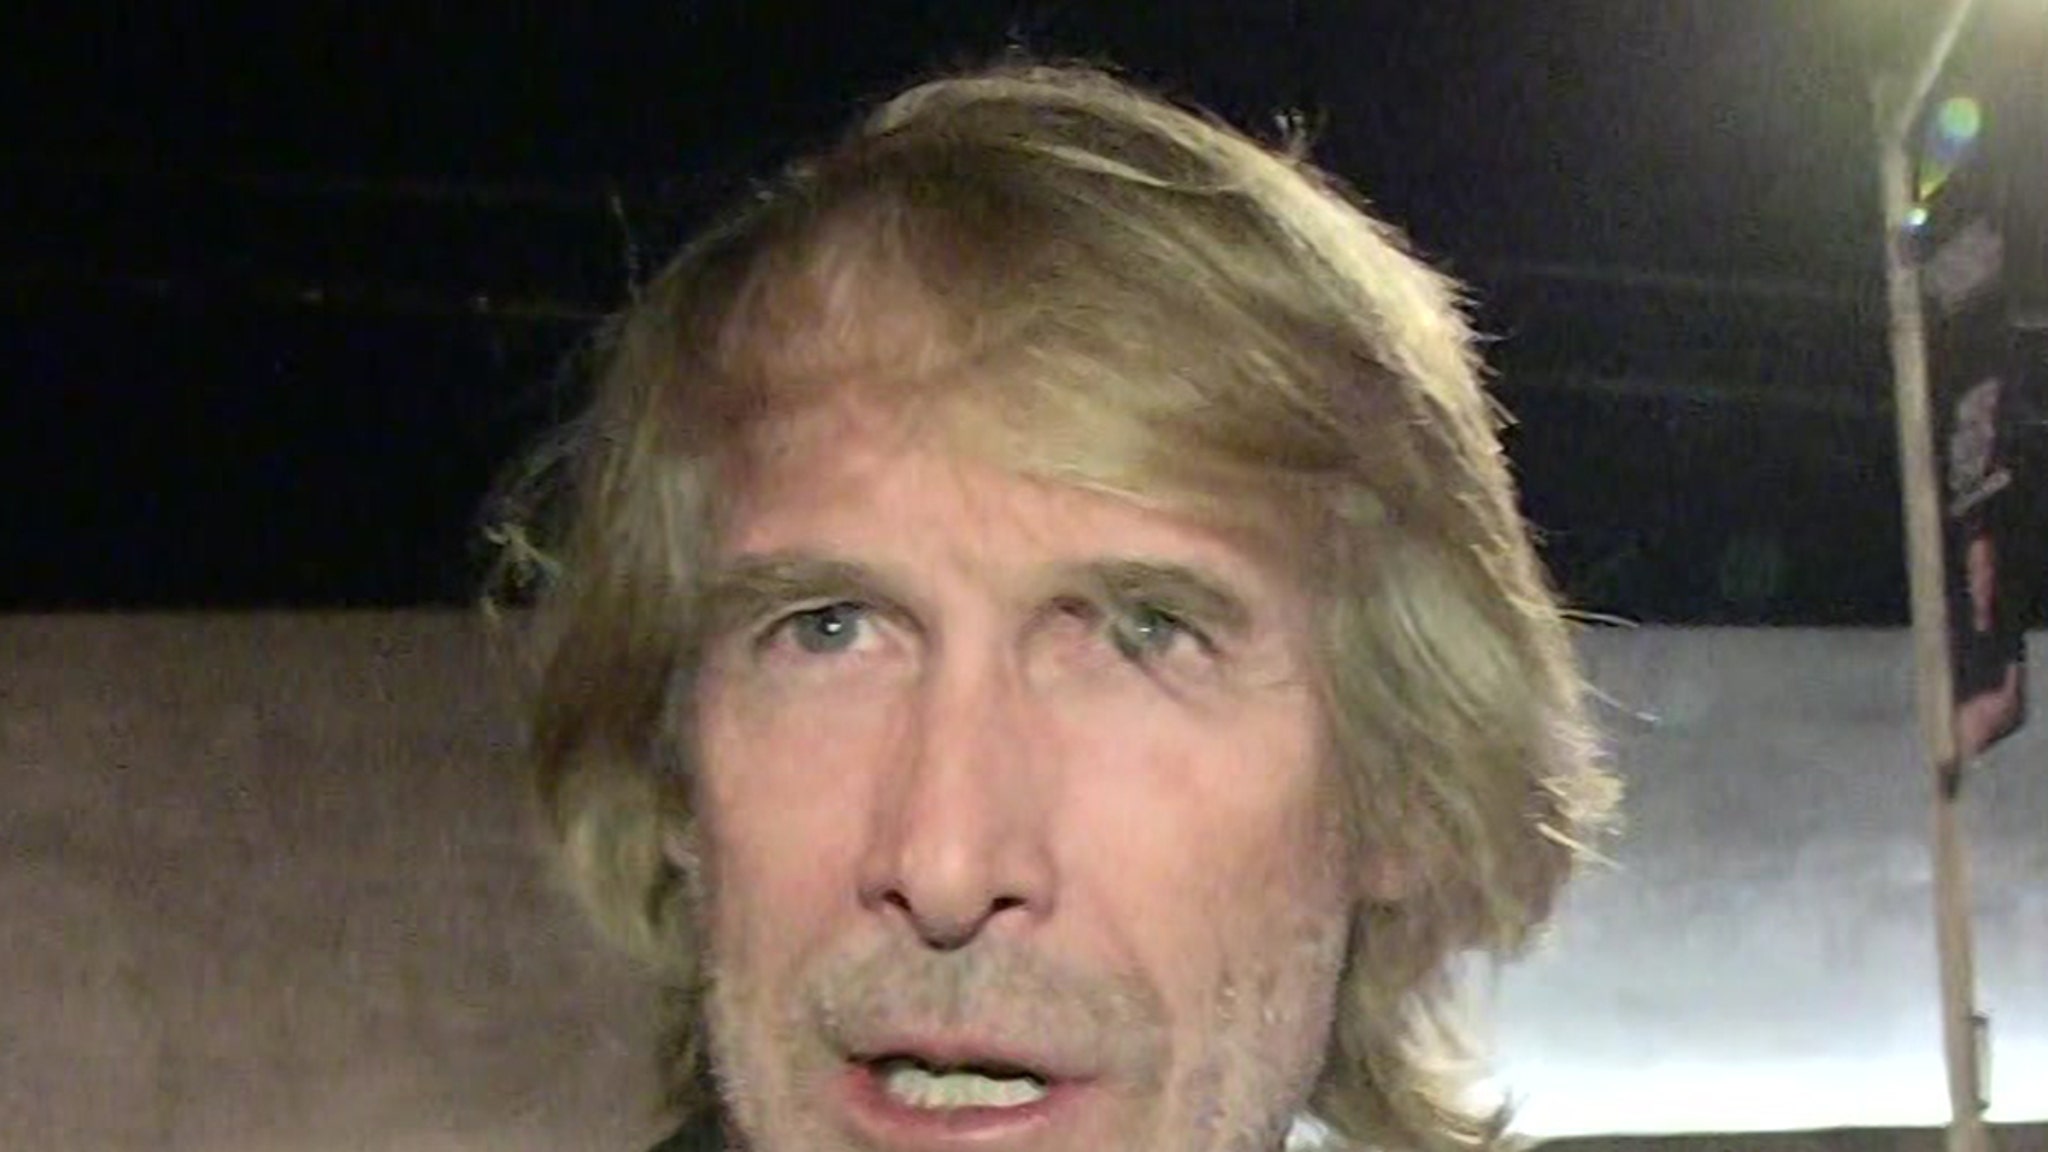 Michael Bay accused of killing a pigeon in Italy, which he denies